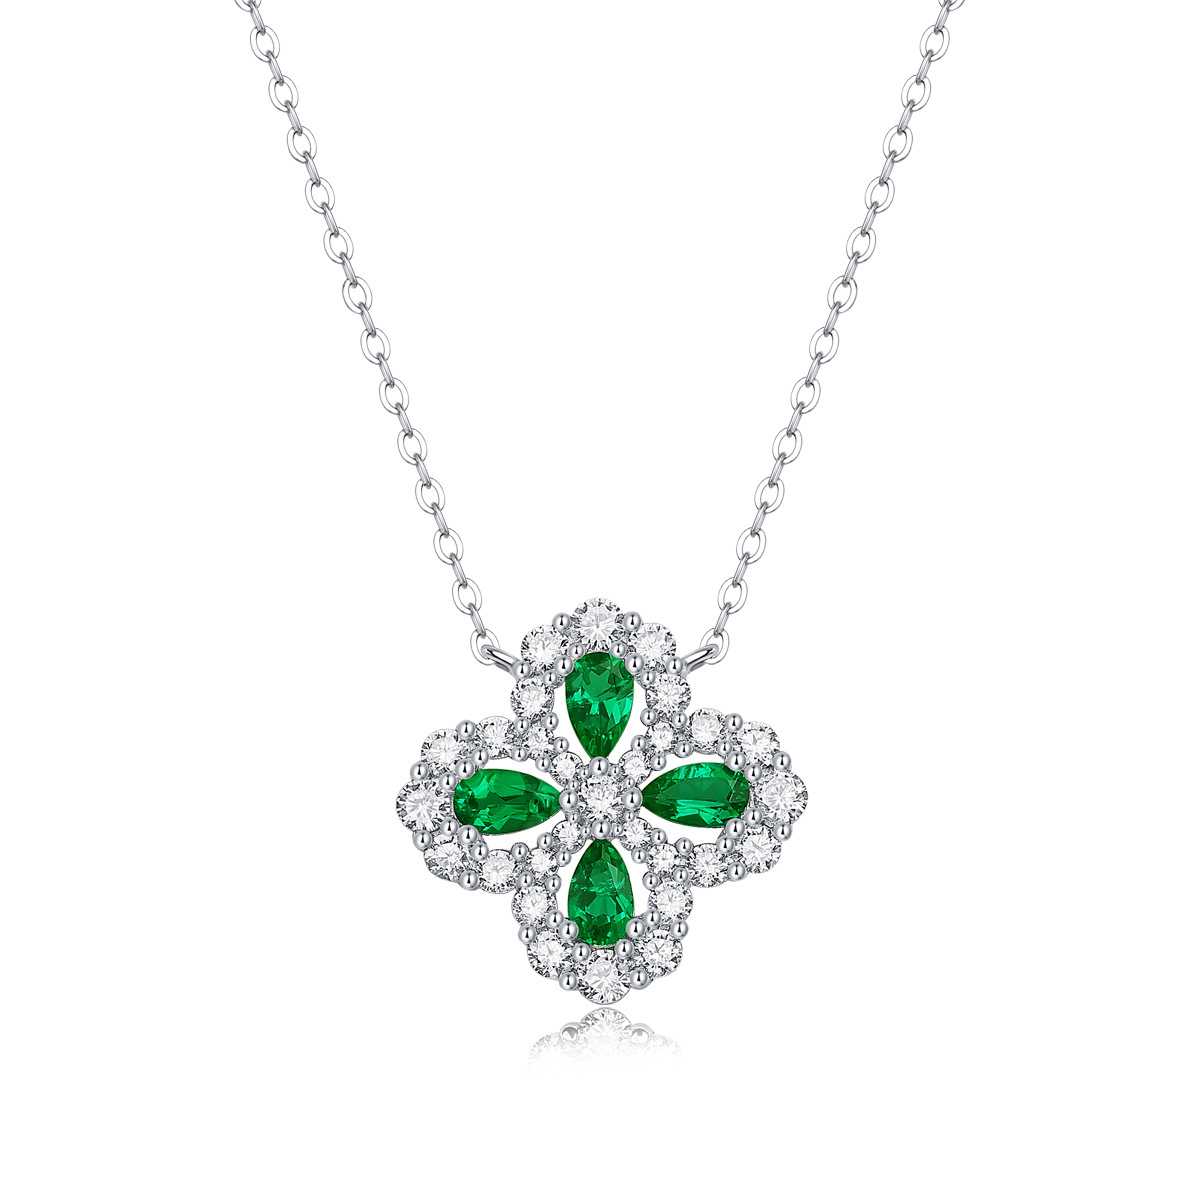 Green Emerald Sterling Silver Necklace